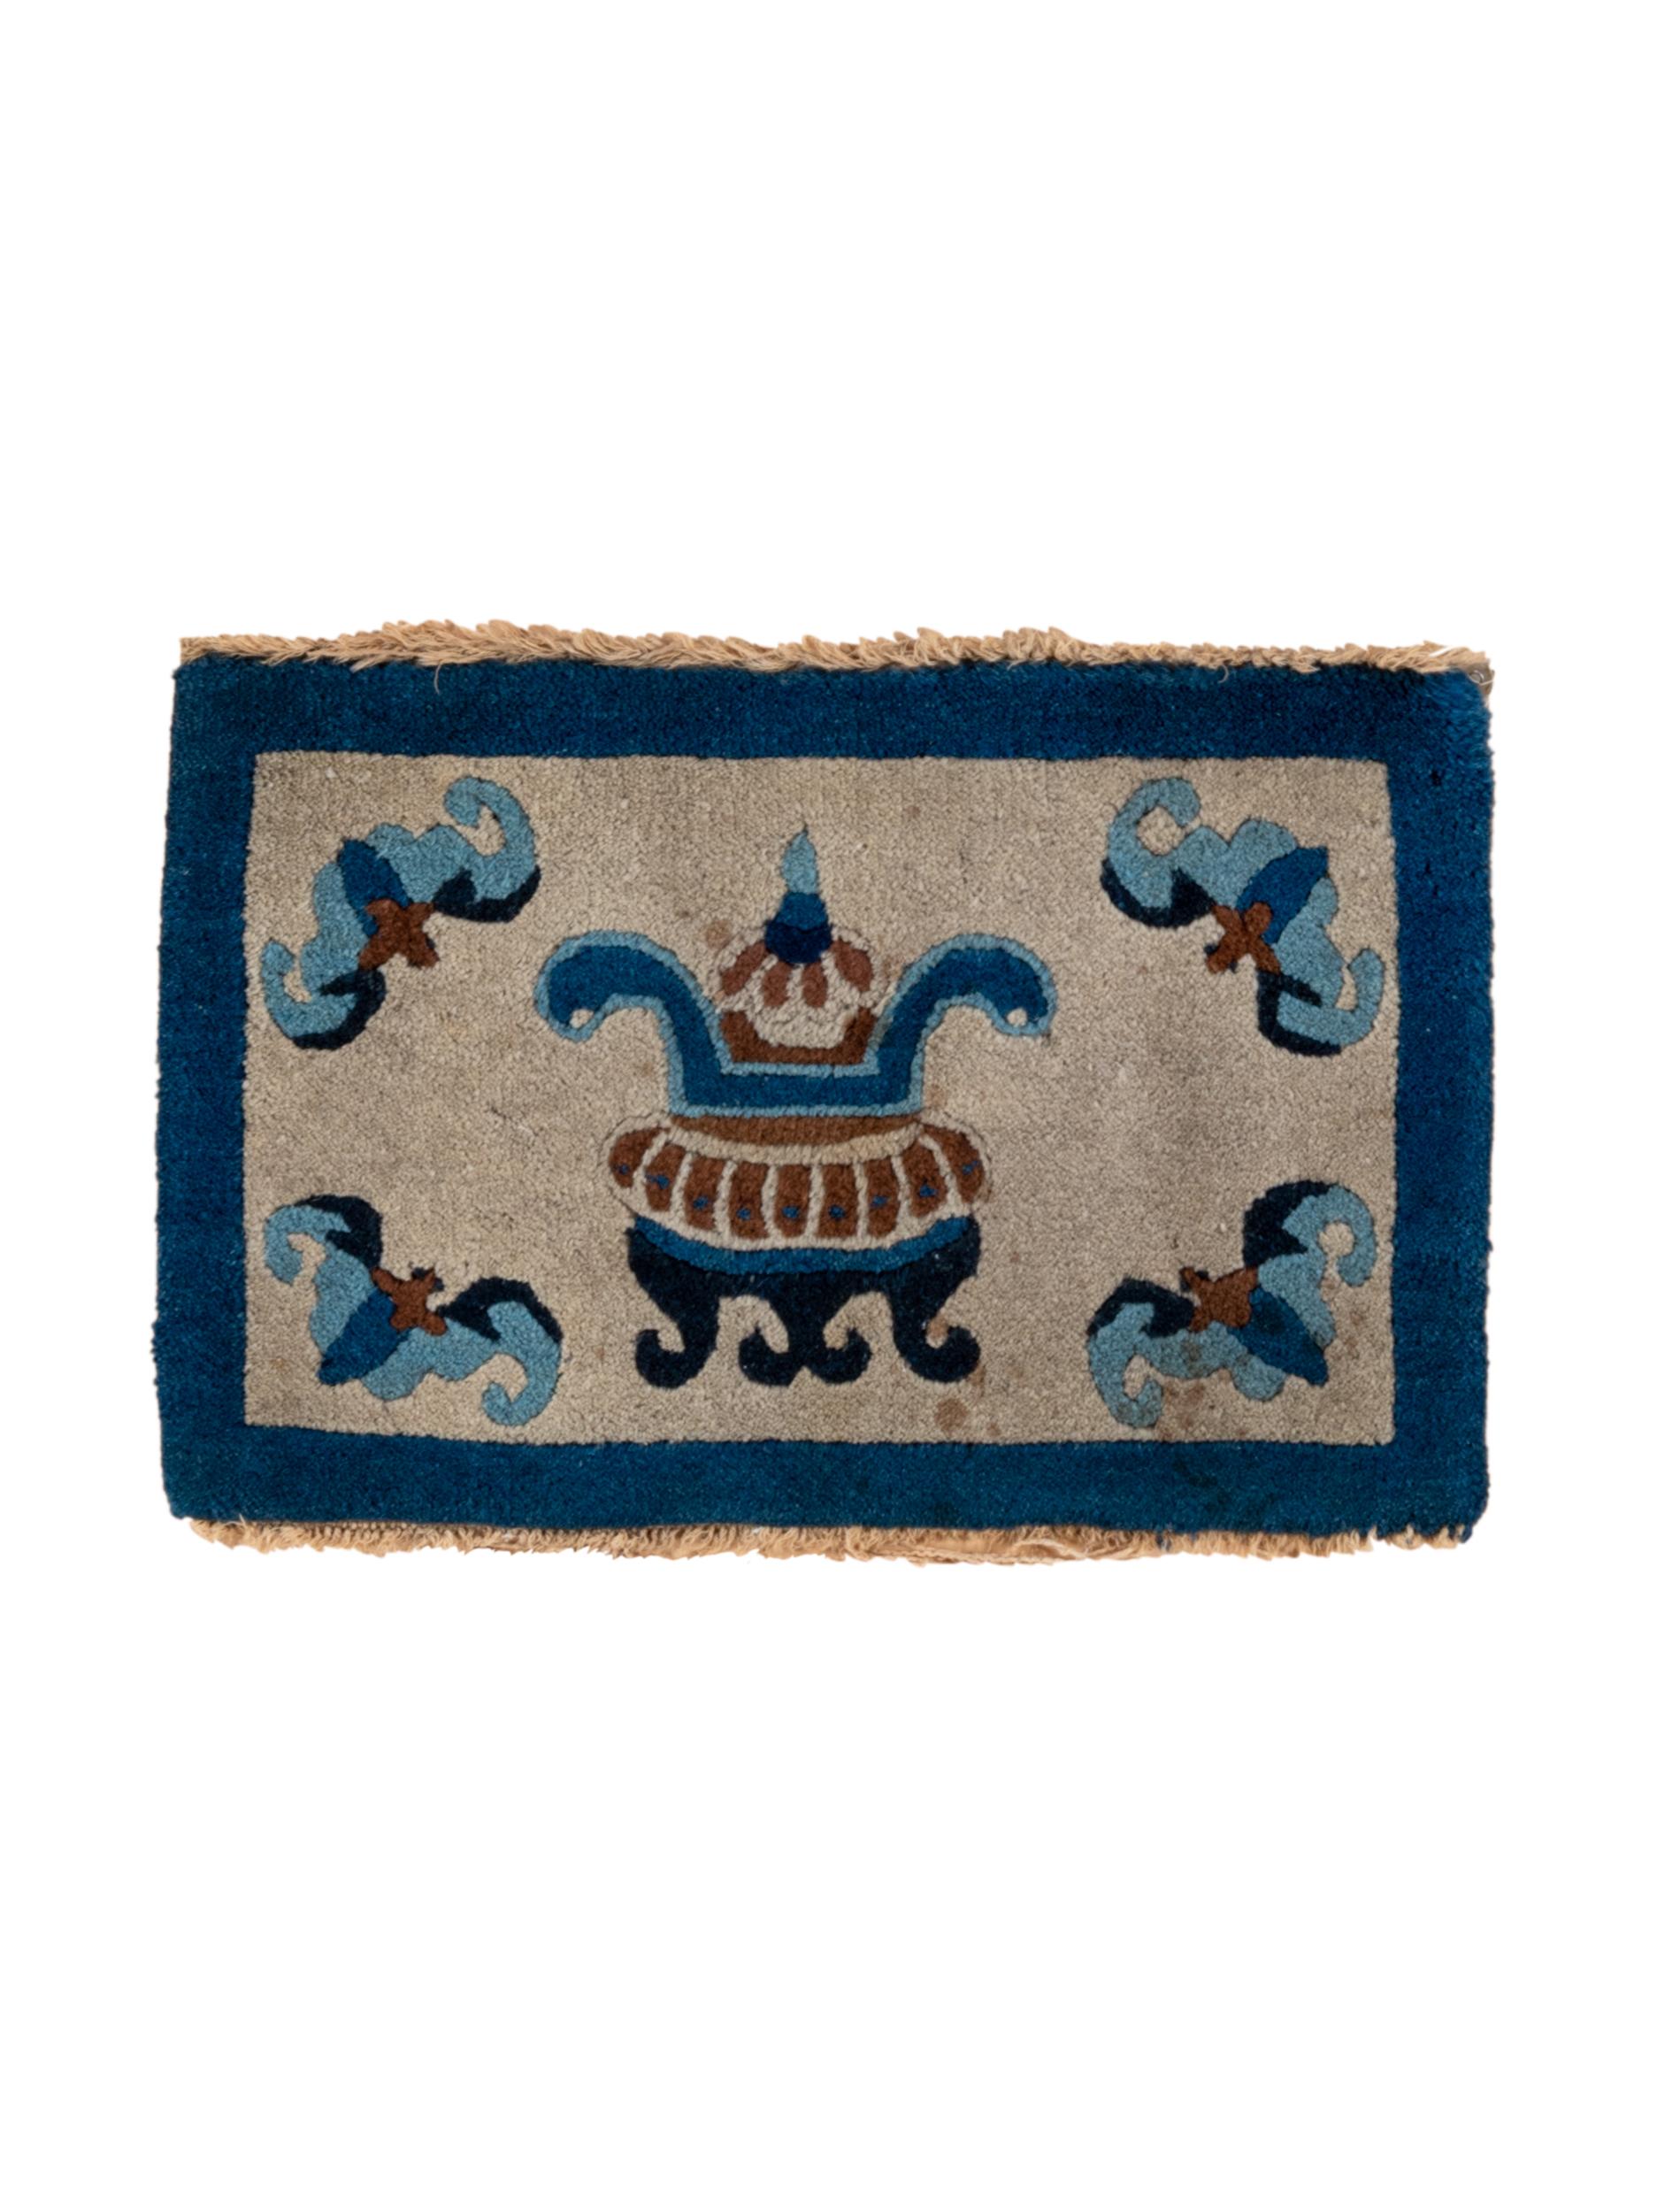 This charming ruglet displays a light pearl field centred by a tri-legged censer in red and shades of blue. Four blue-toned bats flutter about in the corners. Dark blue plain border.  Cotton foundation. Good condition. Makes an excellent